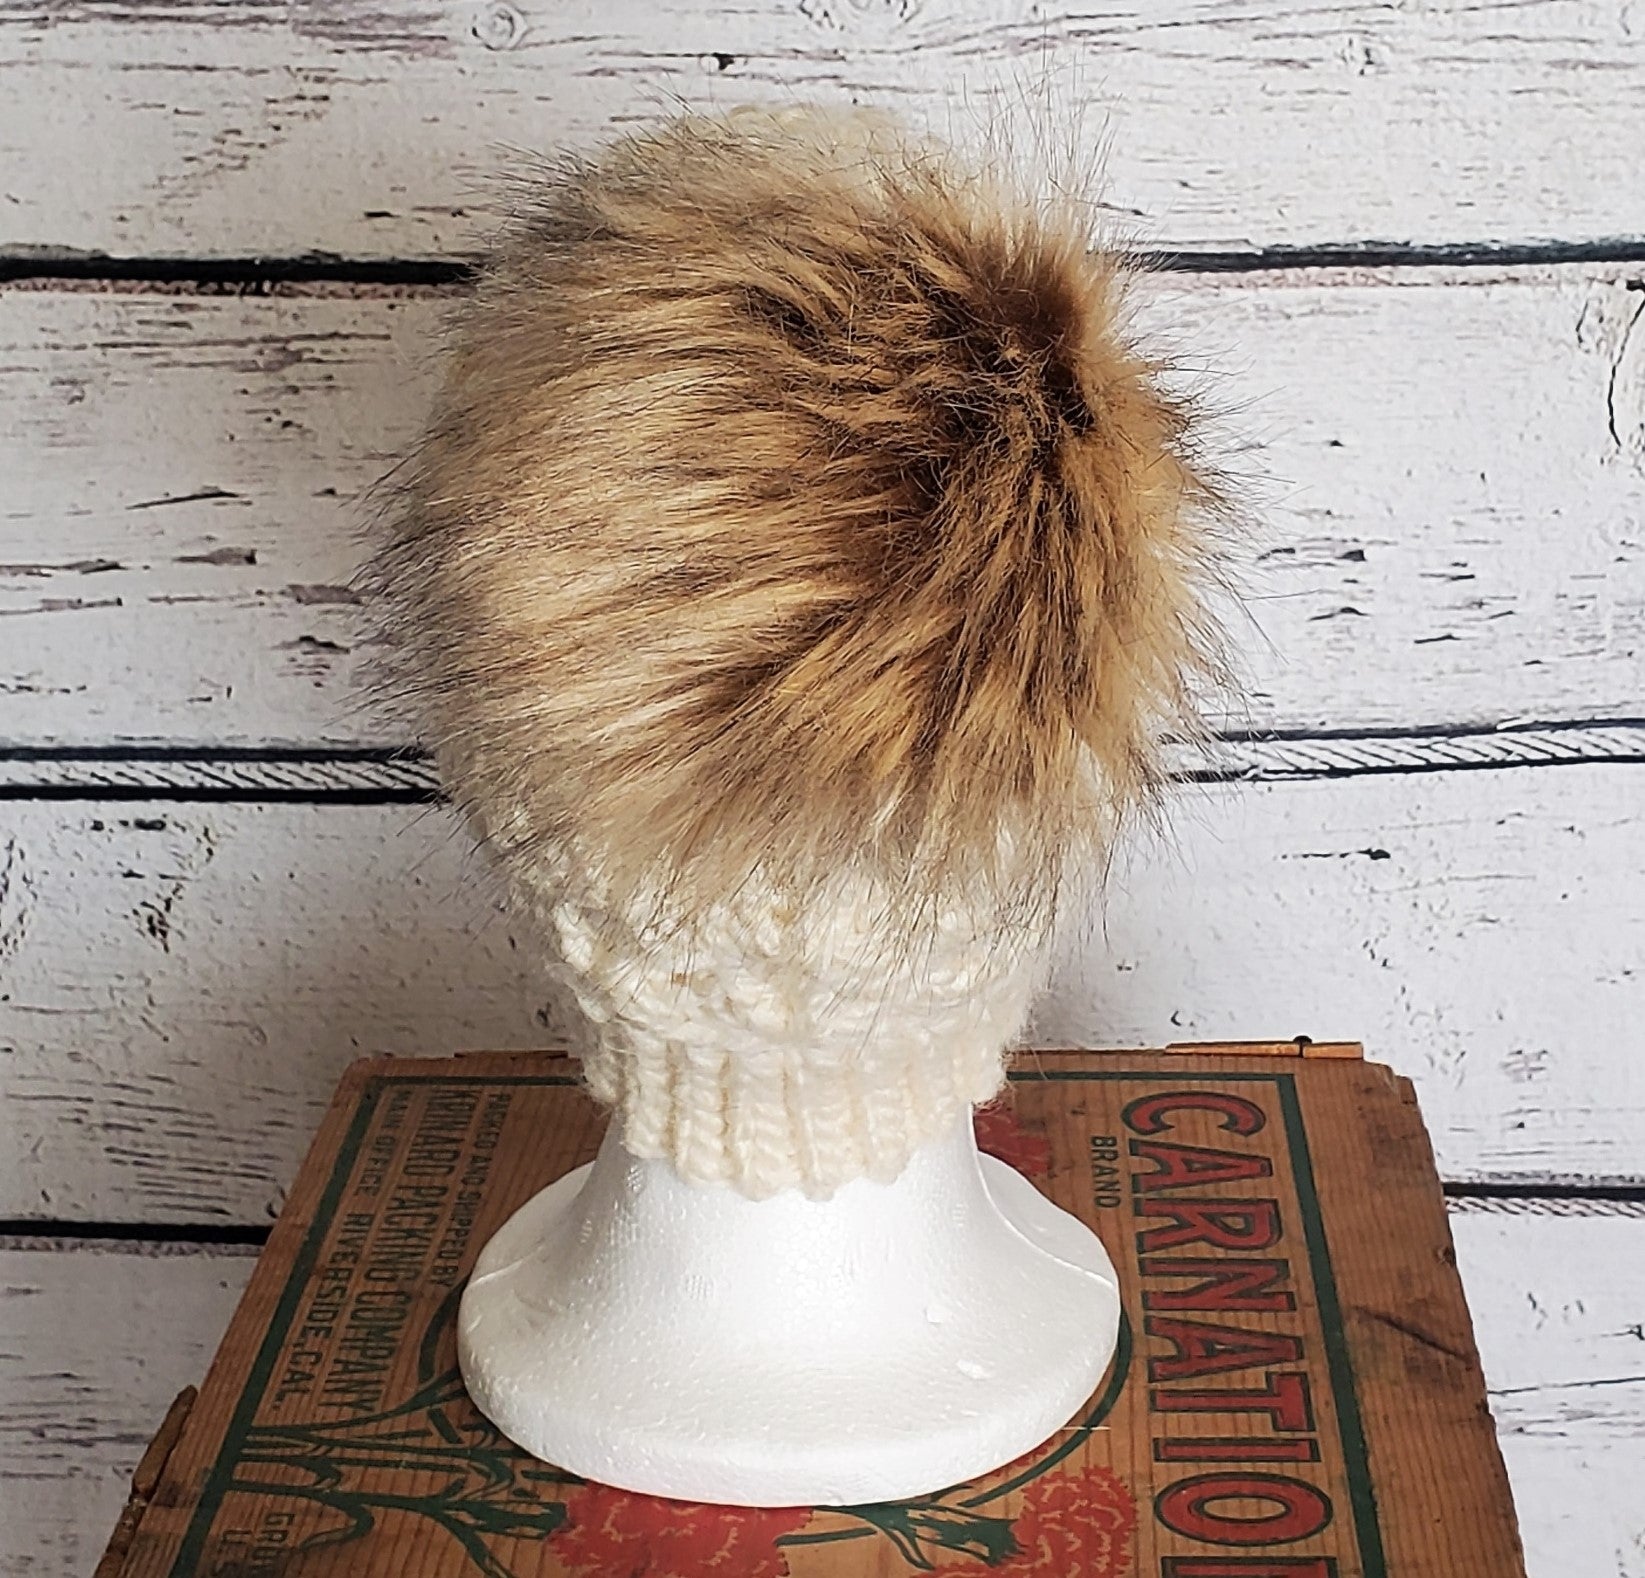 Custom Size Cream Faux Fur Pom Poms for Crochet Crafts Hats and